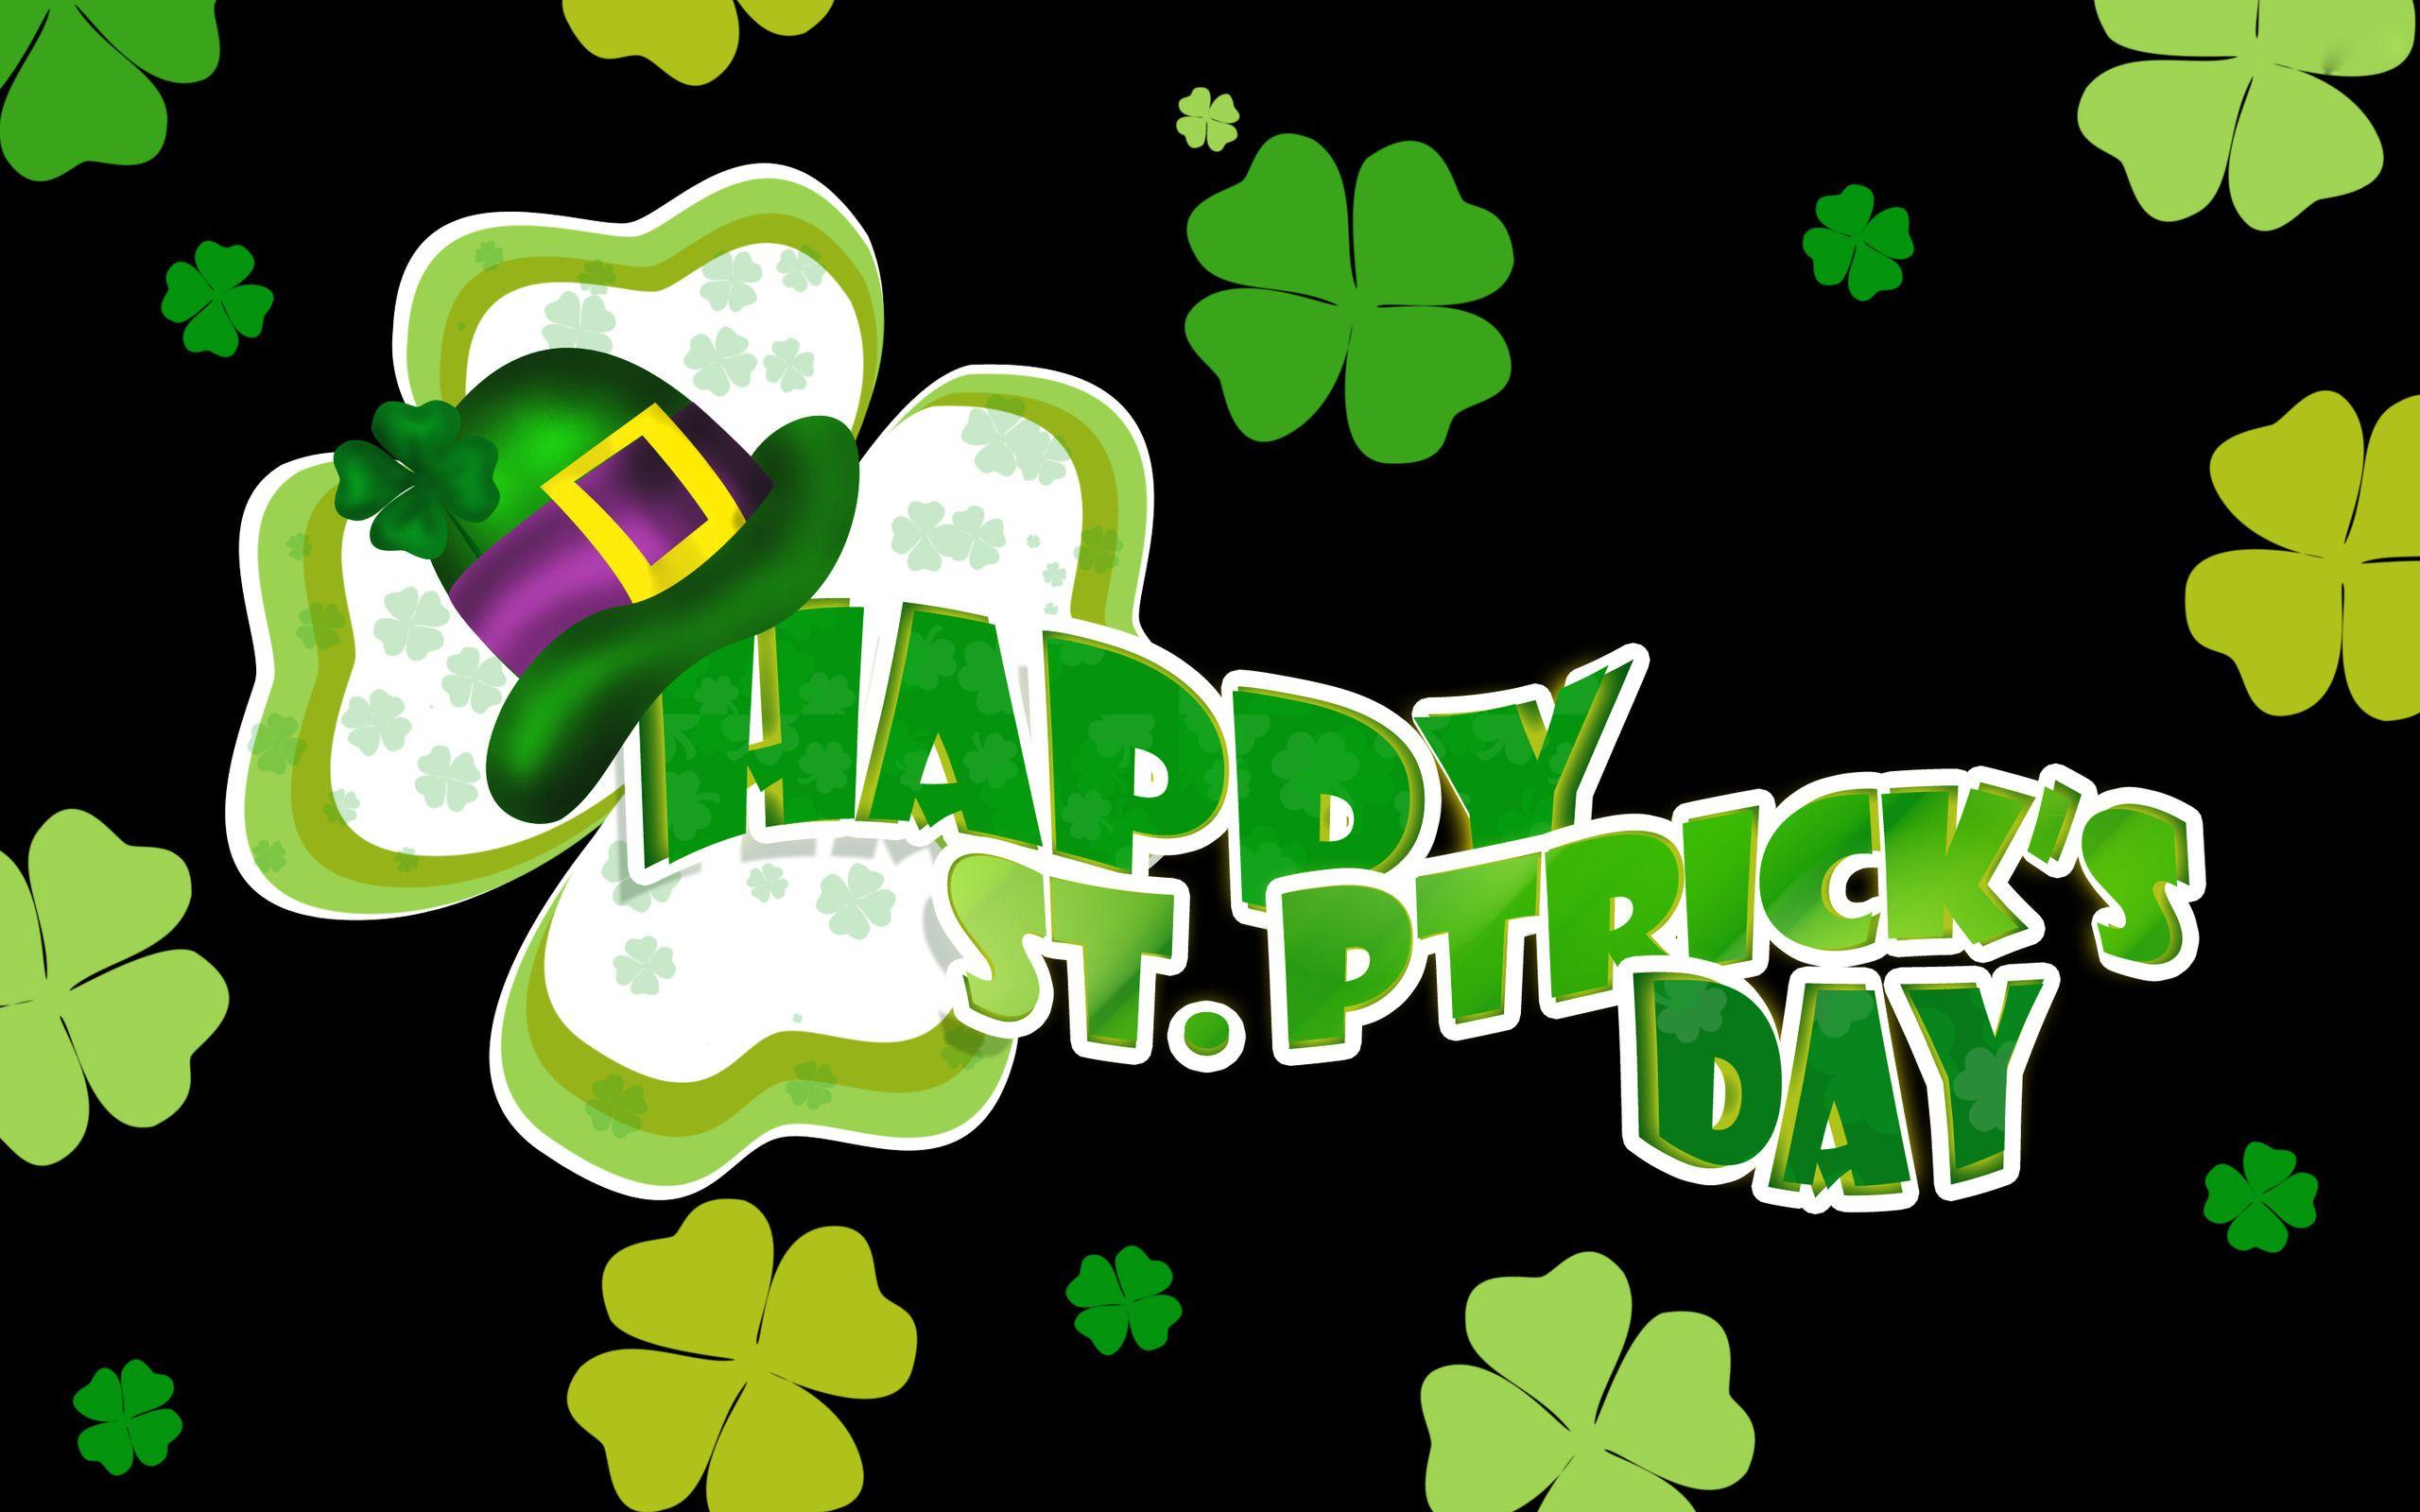 Inspirational Snoopy St Patricks Day Wallpaper Motivational Quotes